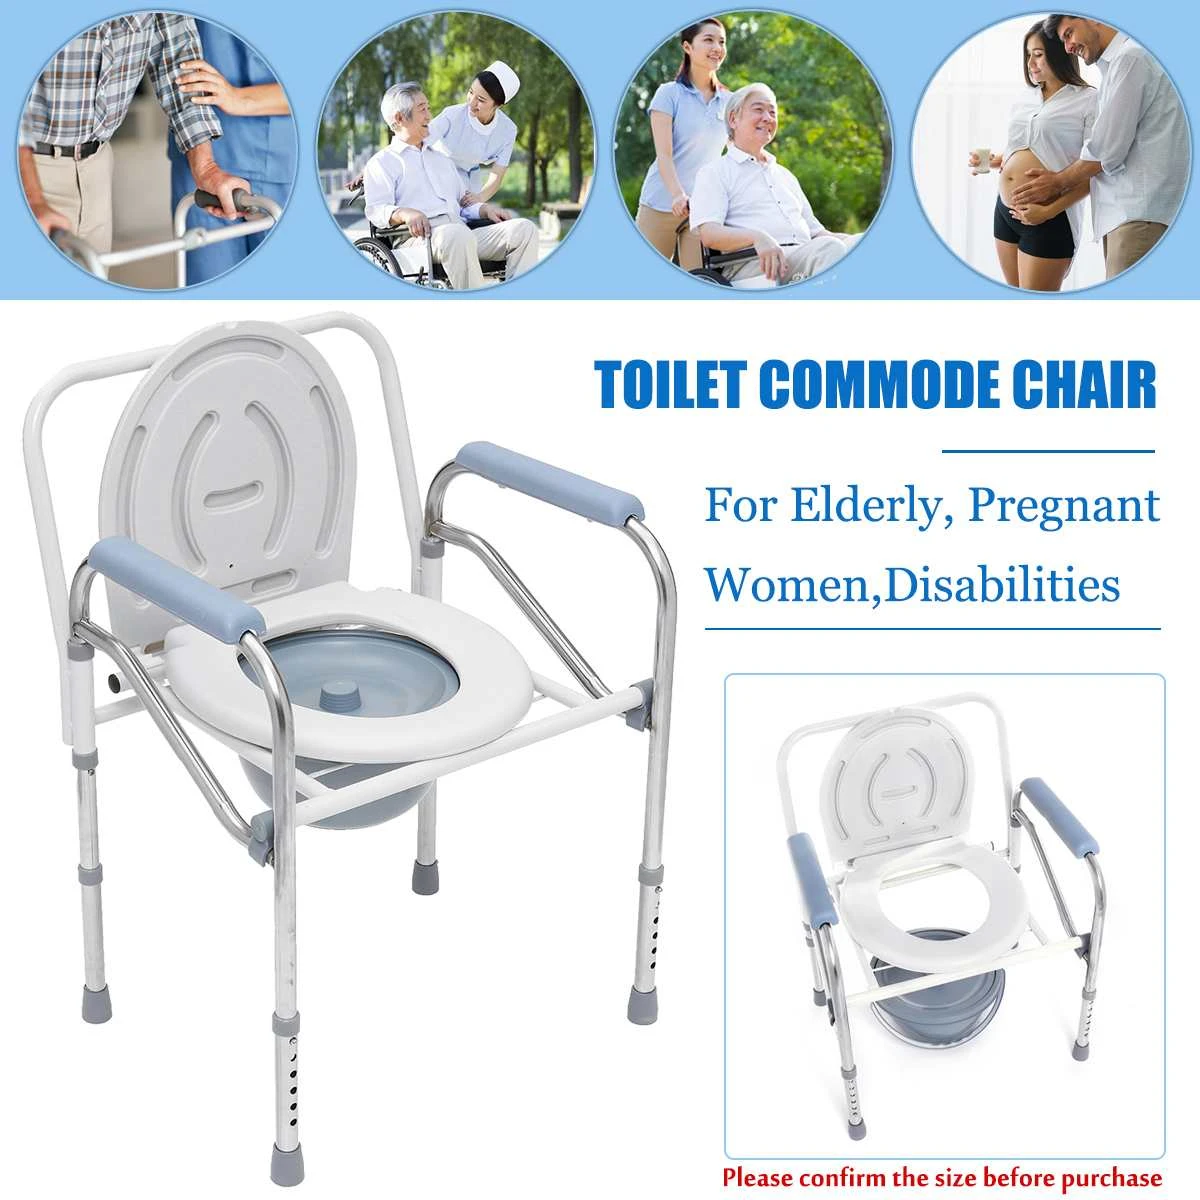 New Portable Foldable Potty Chair Toilet Adjustable Commode Chair Closestool Chamber Pot For Elderly Men Women Stainless Steel Bathroom Chairs Stools Aliexpress